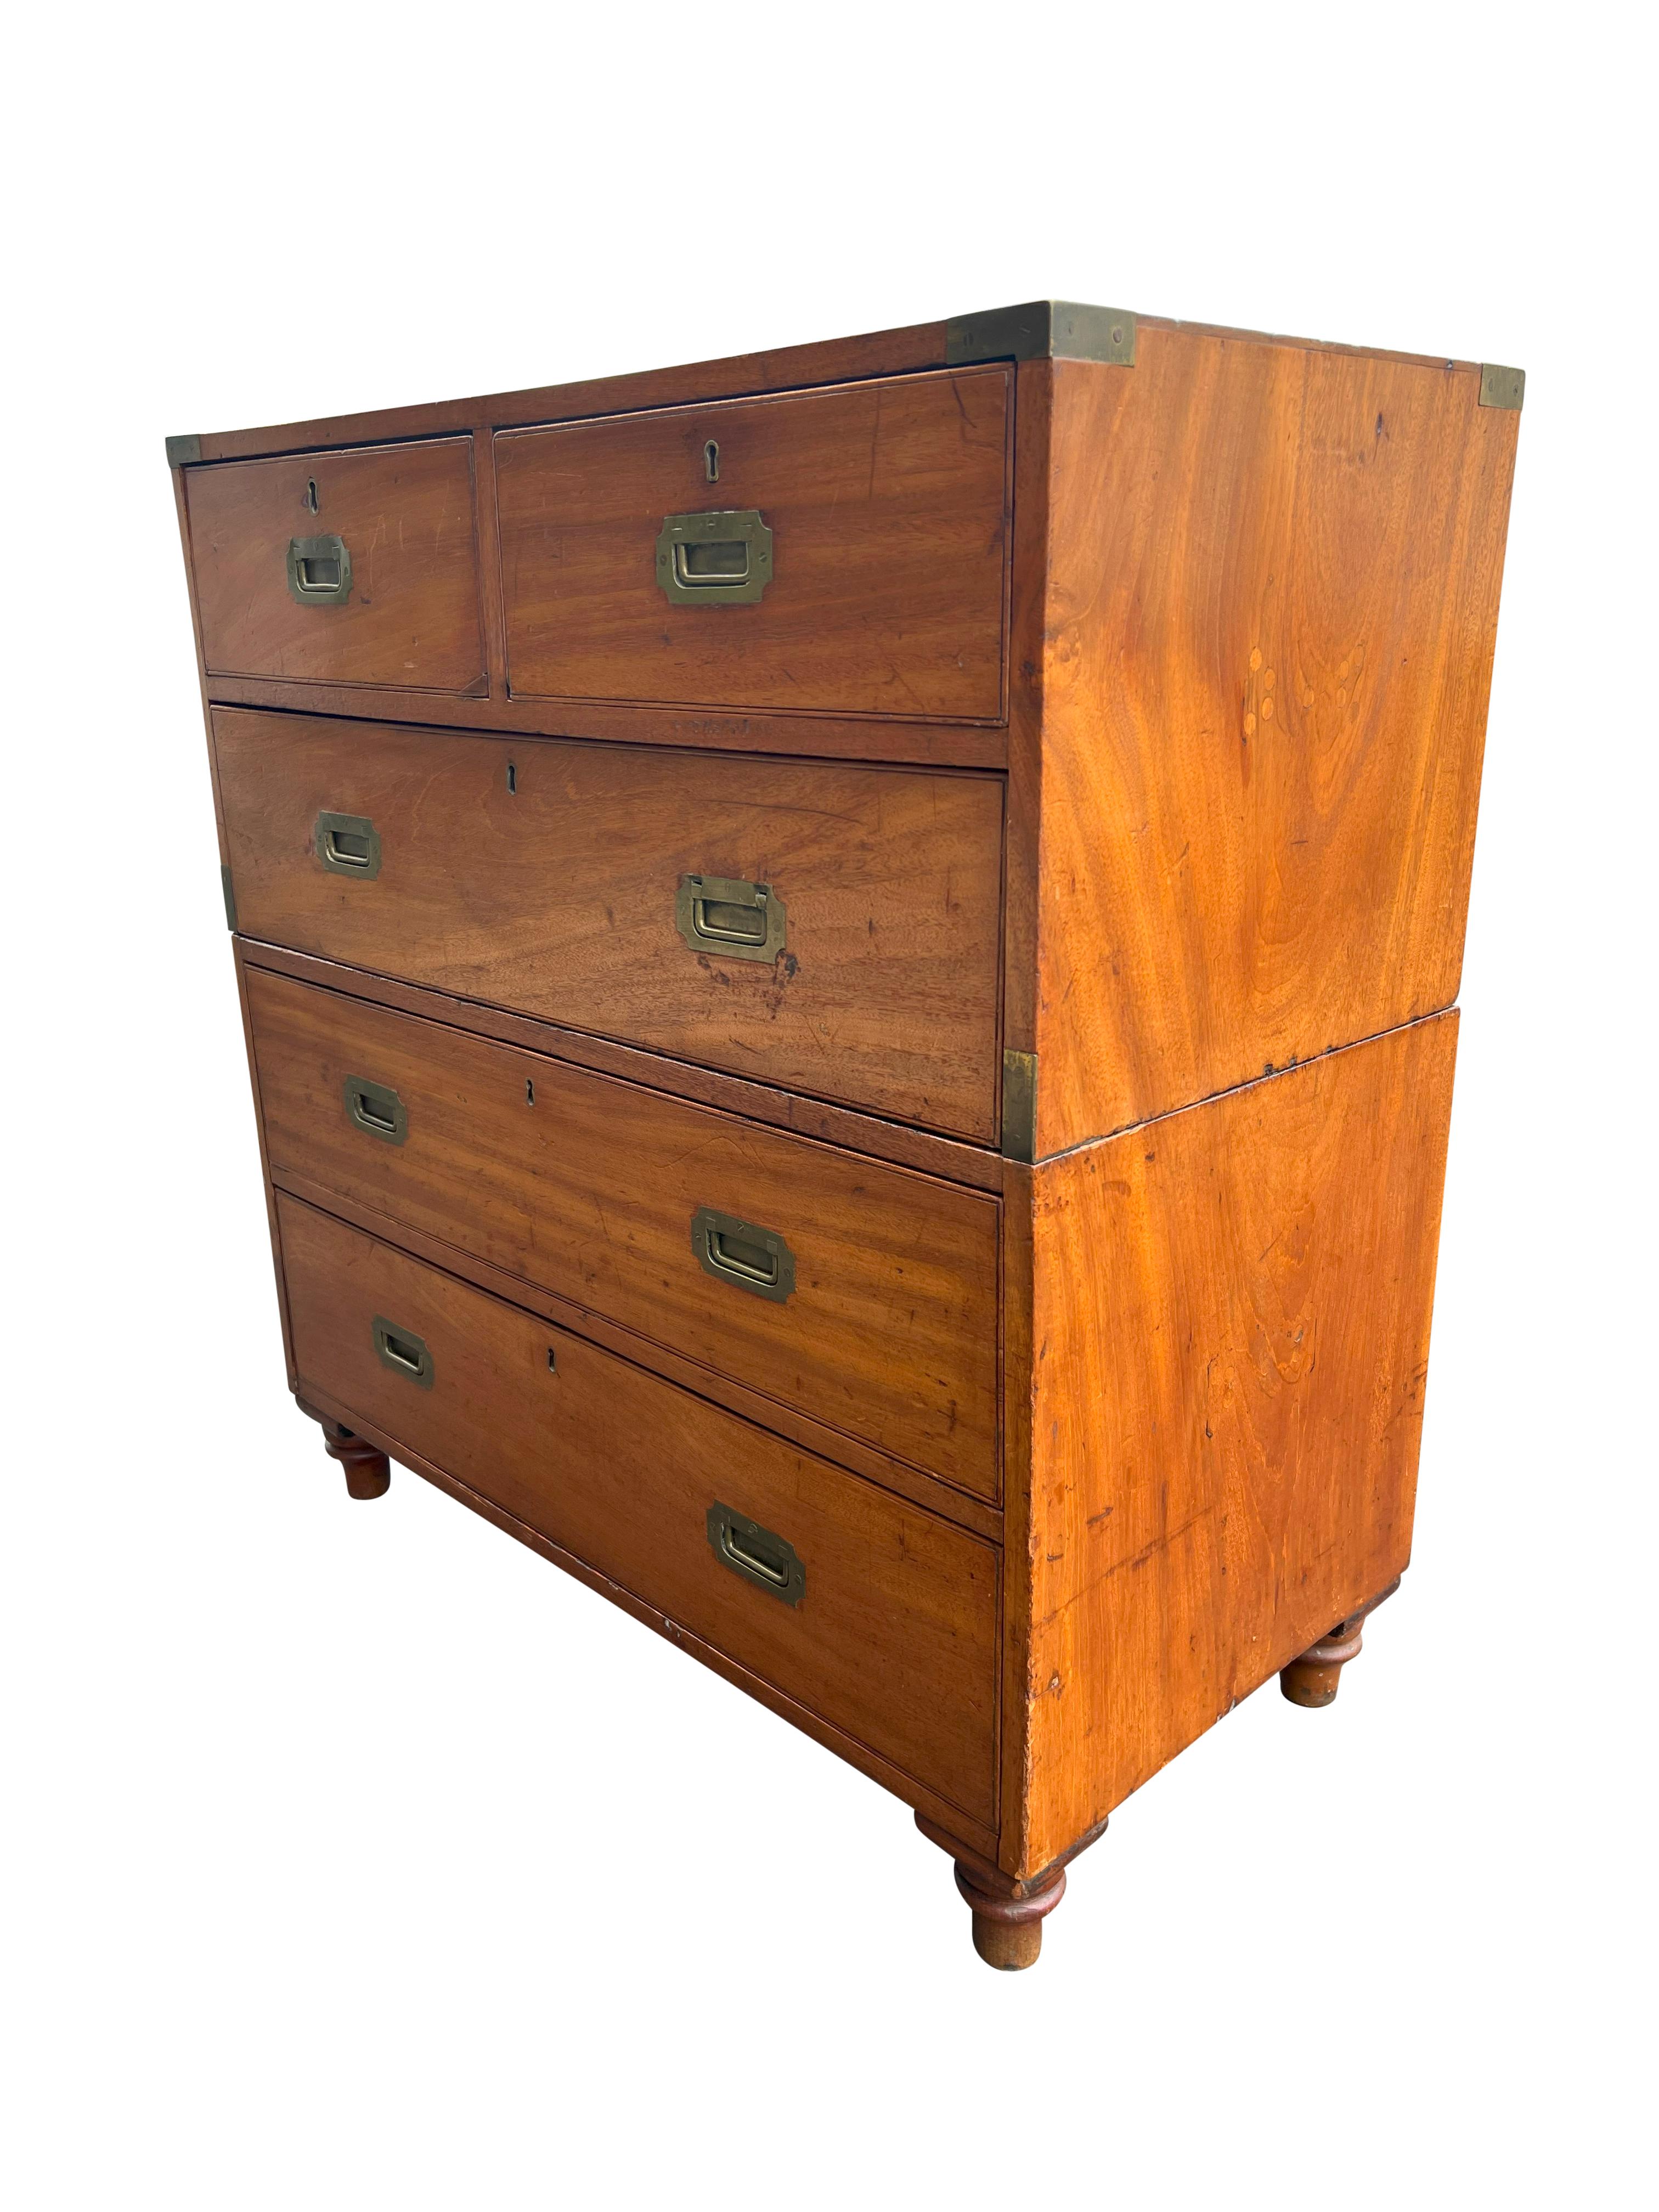 Brass British Military Mahogany Campaign Chest For Sale